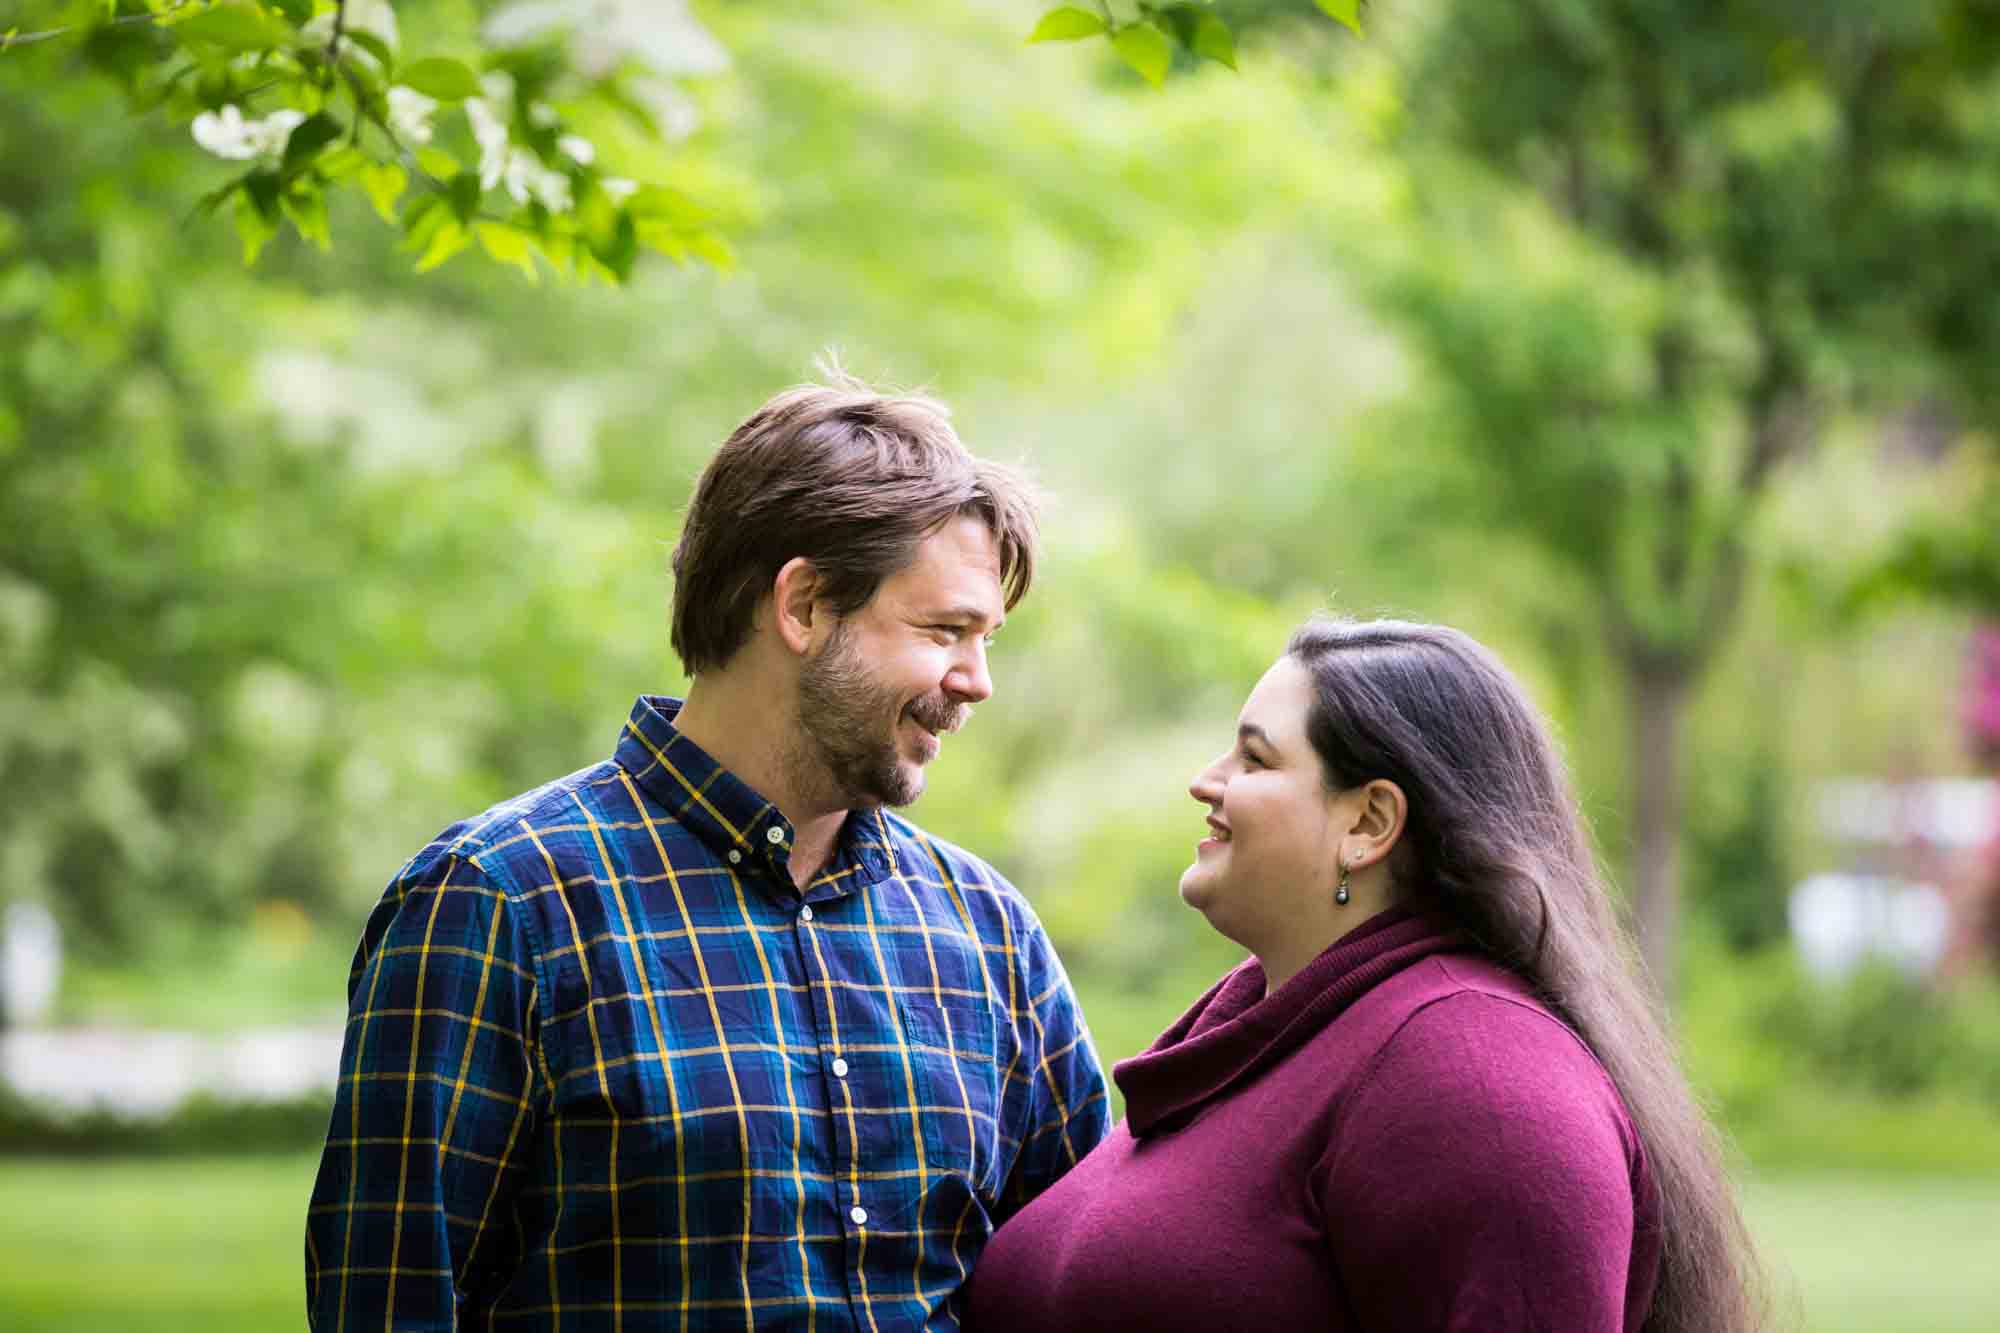 Snug Harbor engagement photos of couple looking at each other in garden